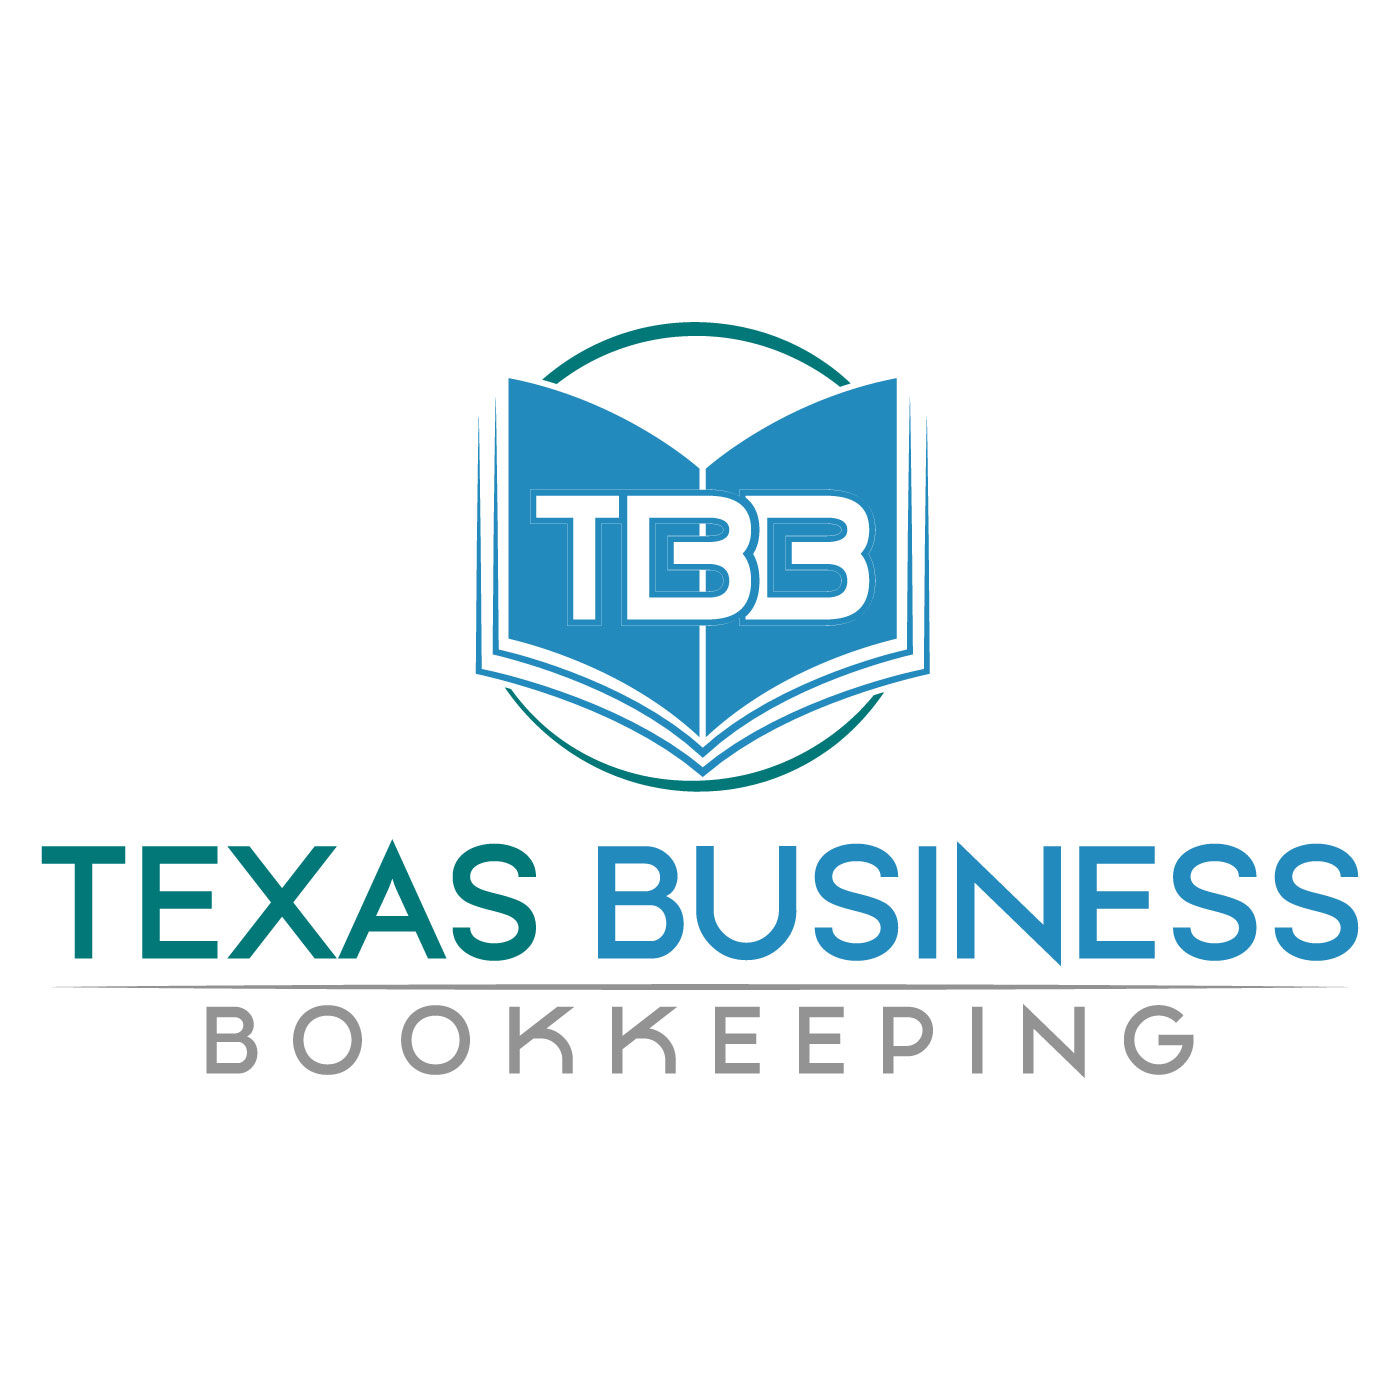 Texas Business Bookkeeping